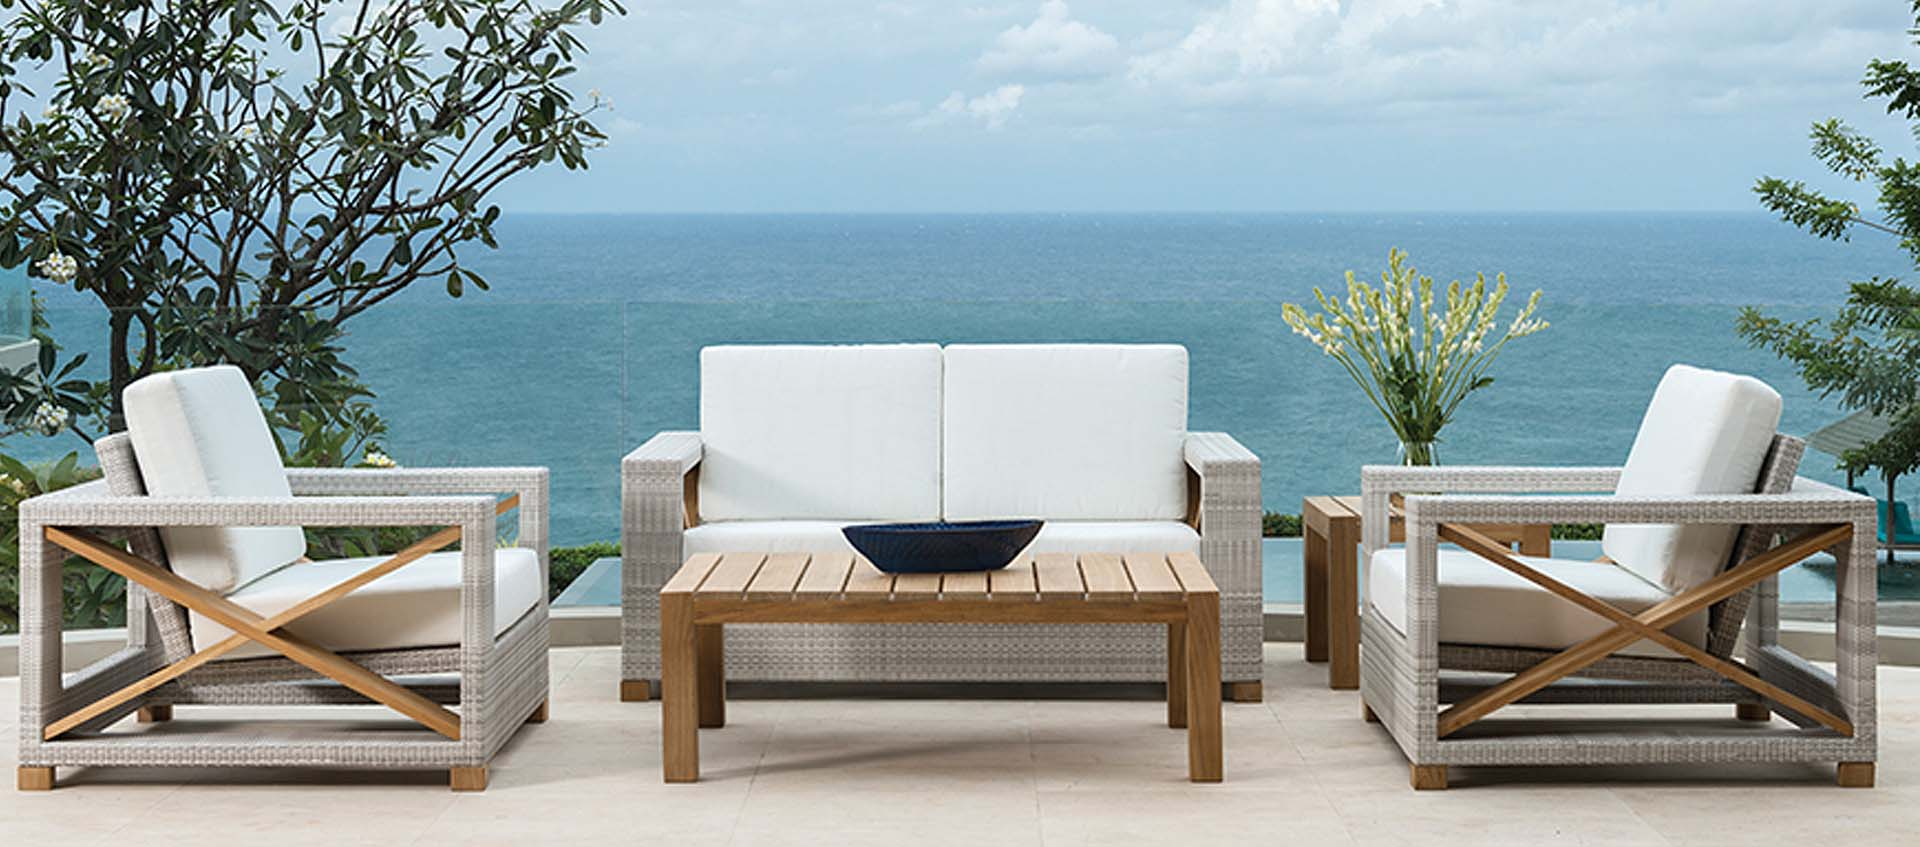 All American Outdoor Living Patio Furniture within proportions 1920 X 847